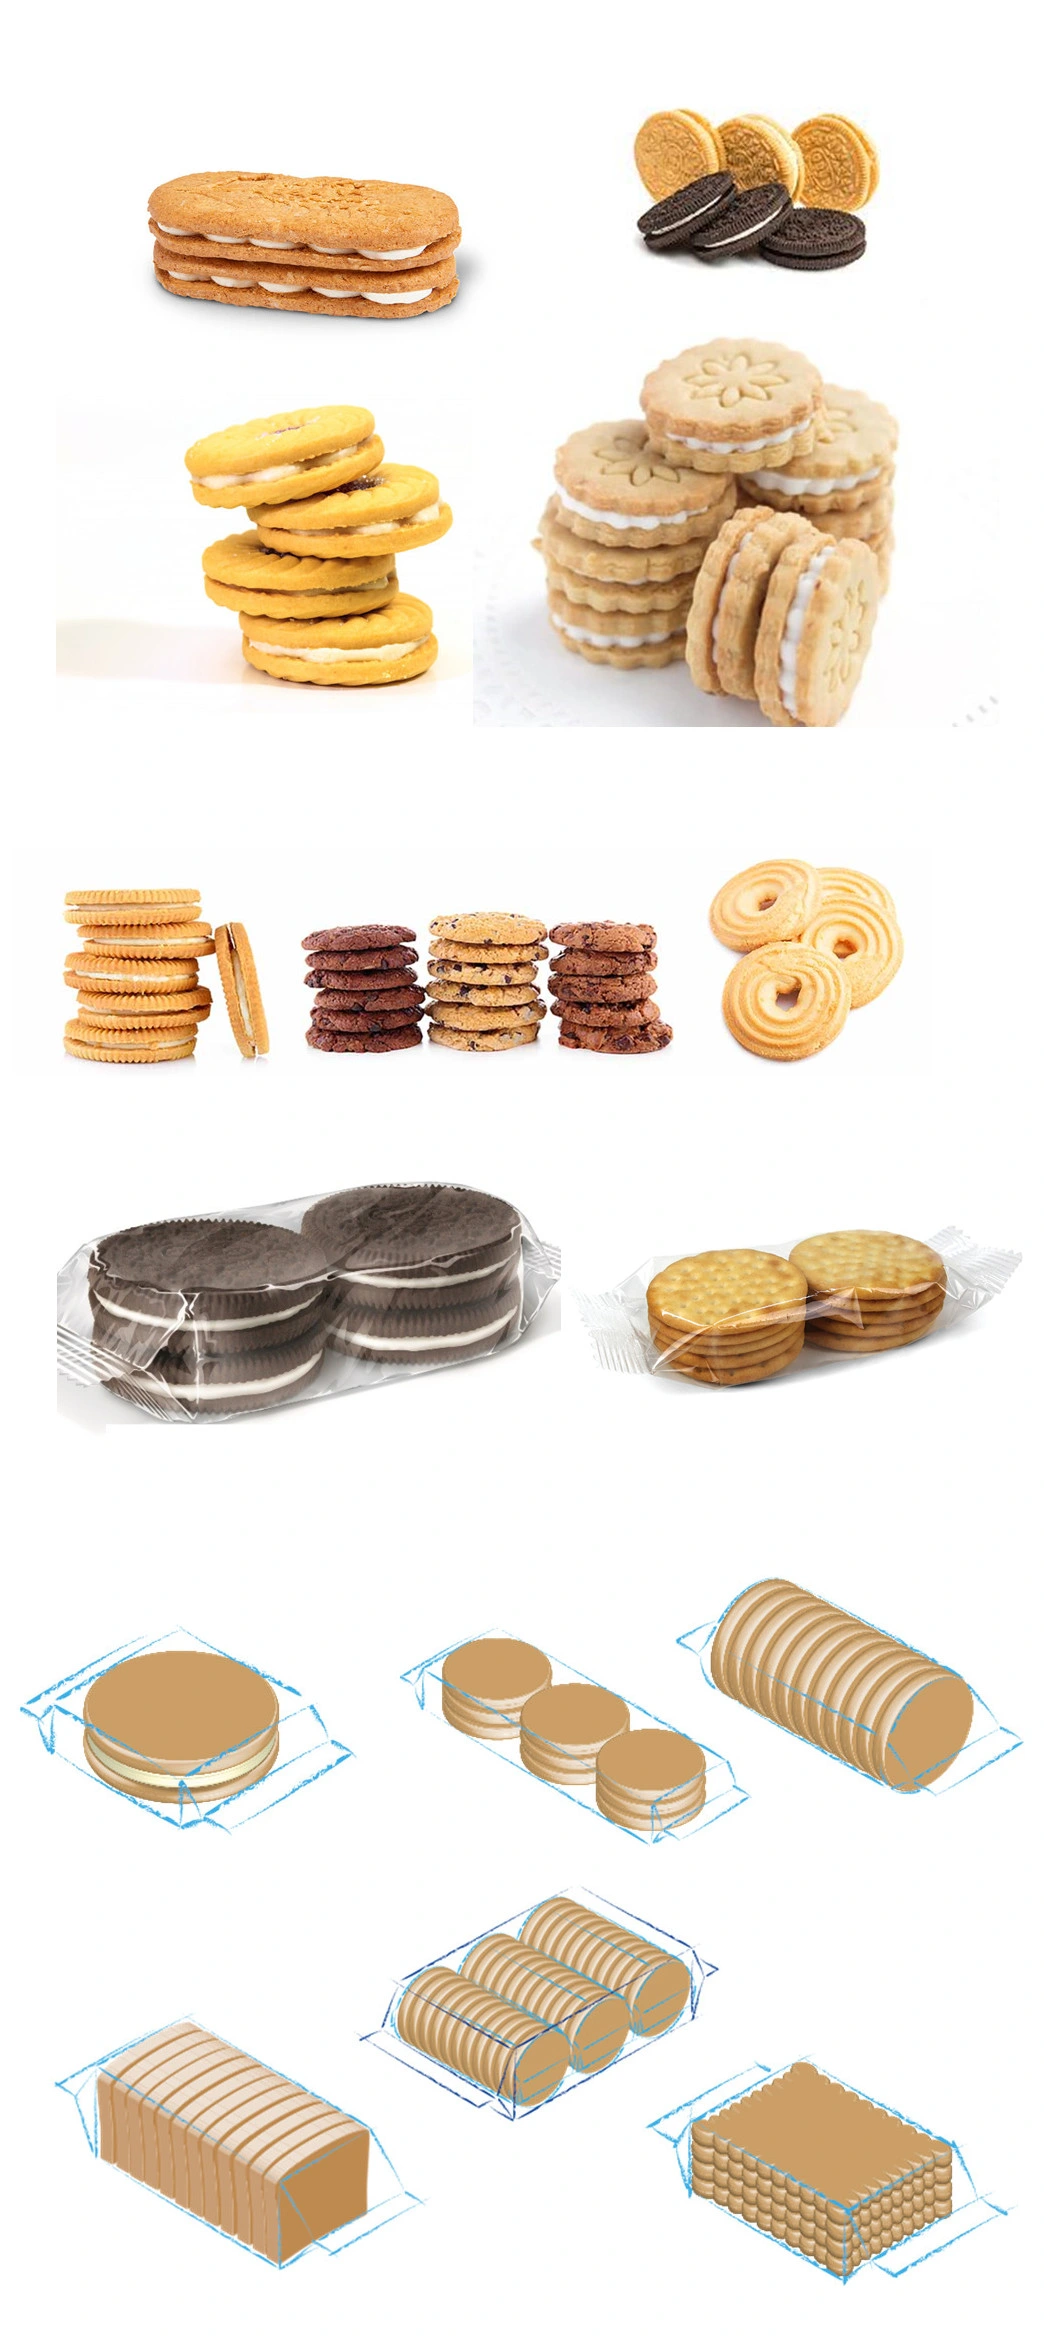 Automatic Tray Free Biscuits Without Tray Plate Biscuits Packing Packaging Machine Equipment